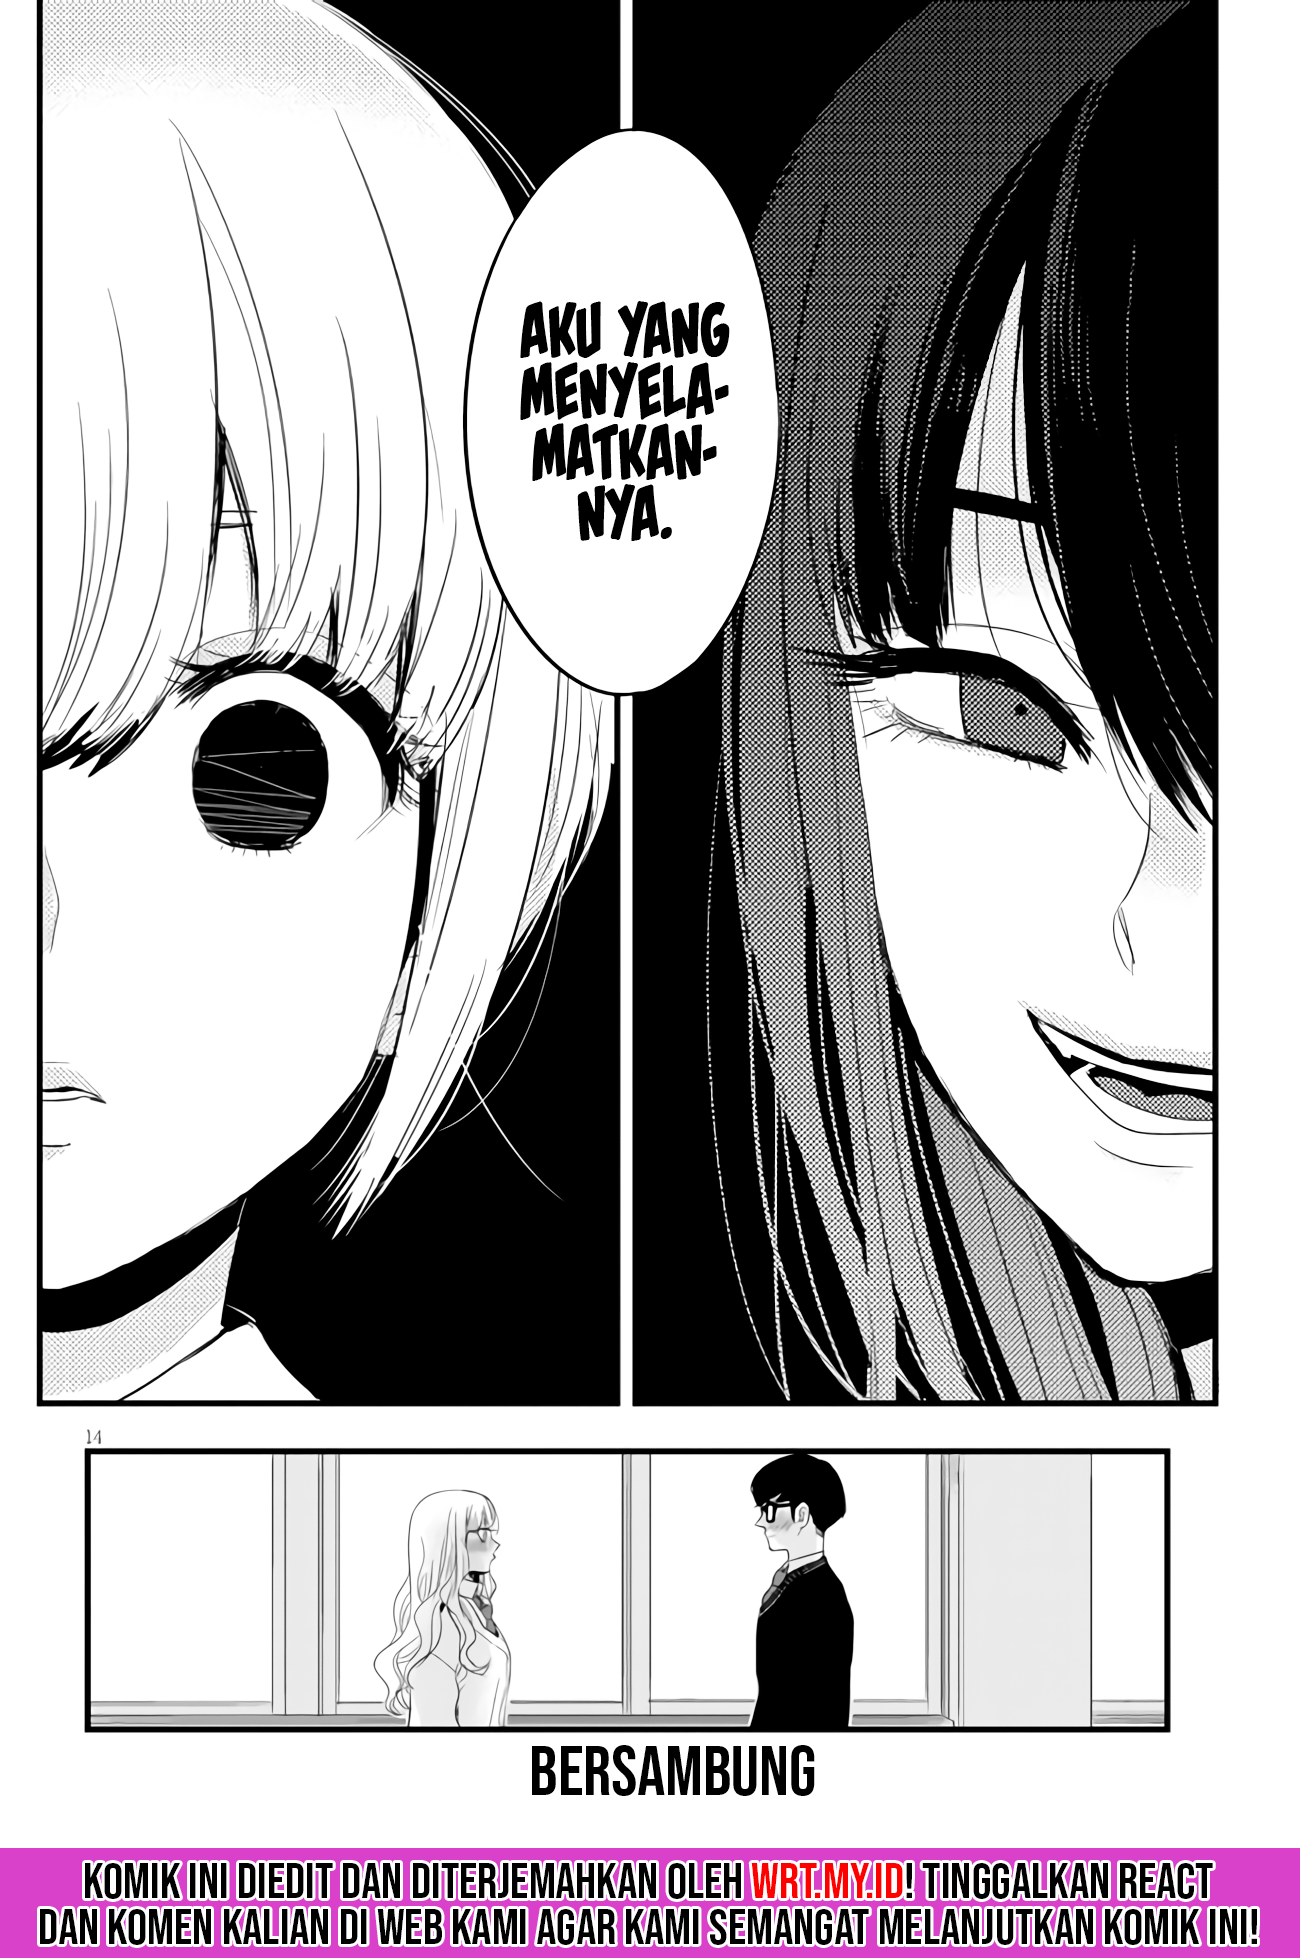 At That Time, The Battle Began (Yandere X Yandere) Chapter 8 - 131